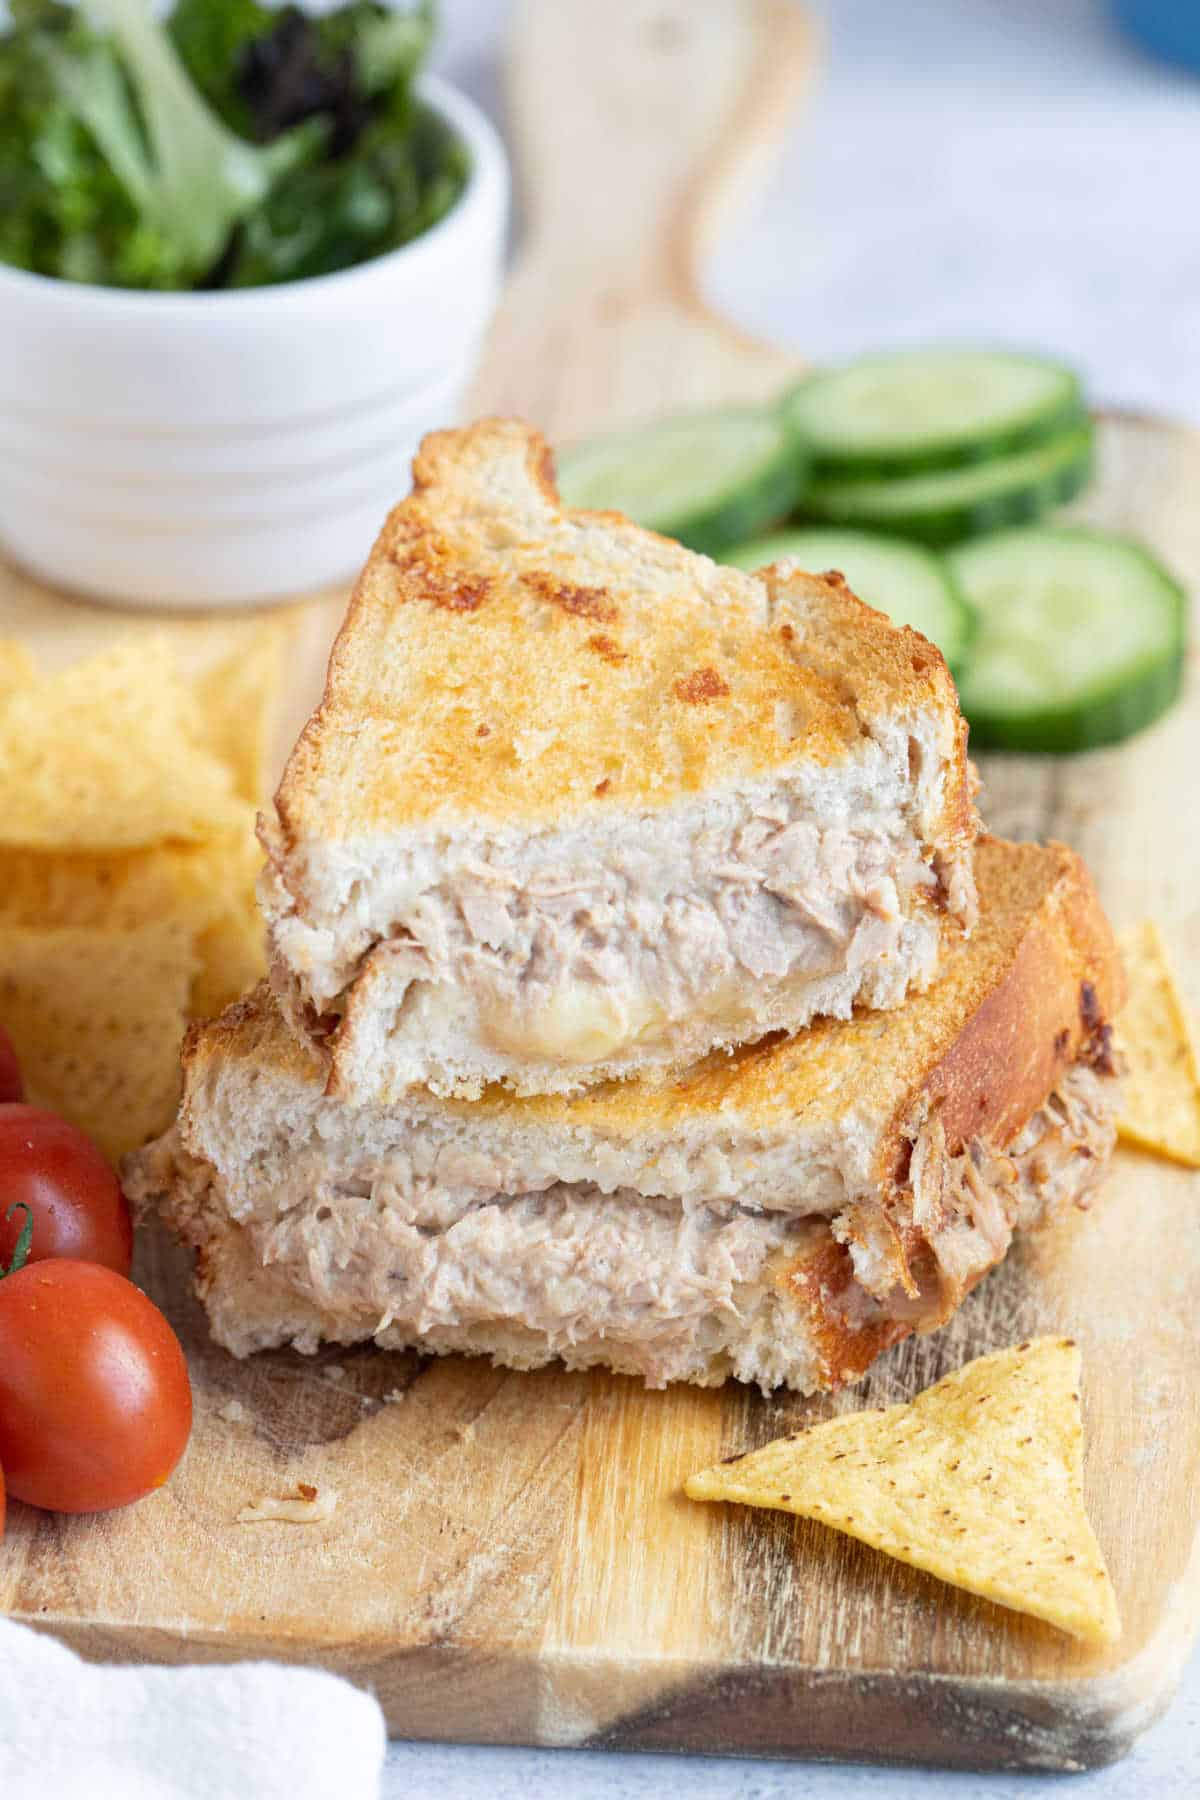 An air fried tuna melt sandwich cut in half and served with tortilla chips and tomatoes.